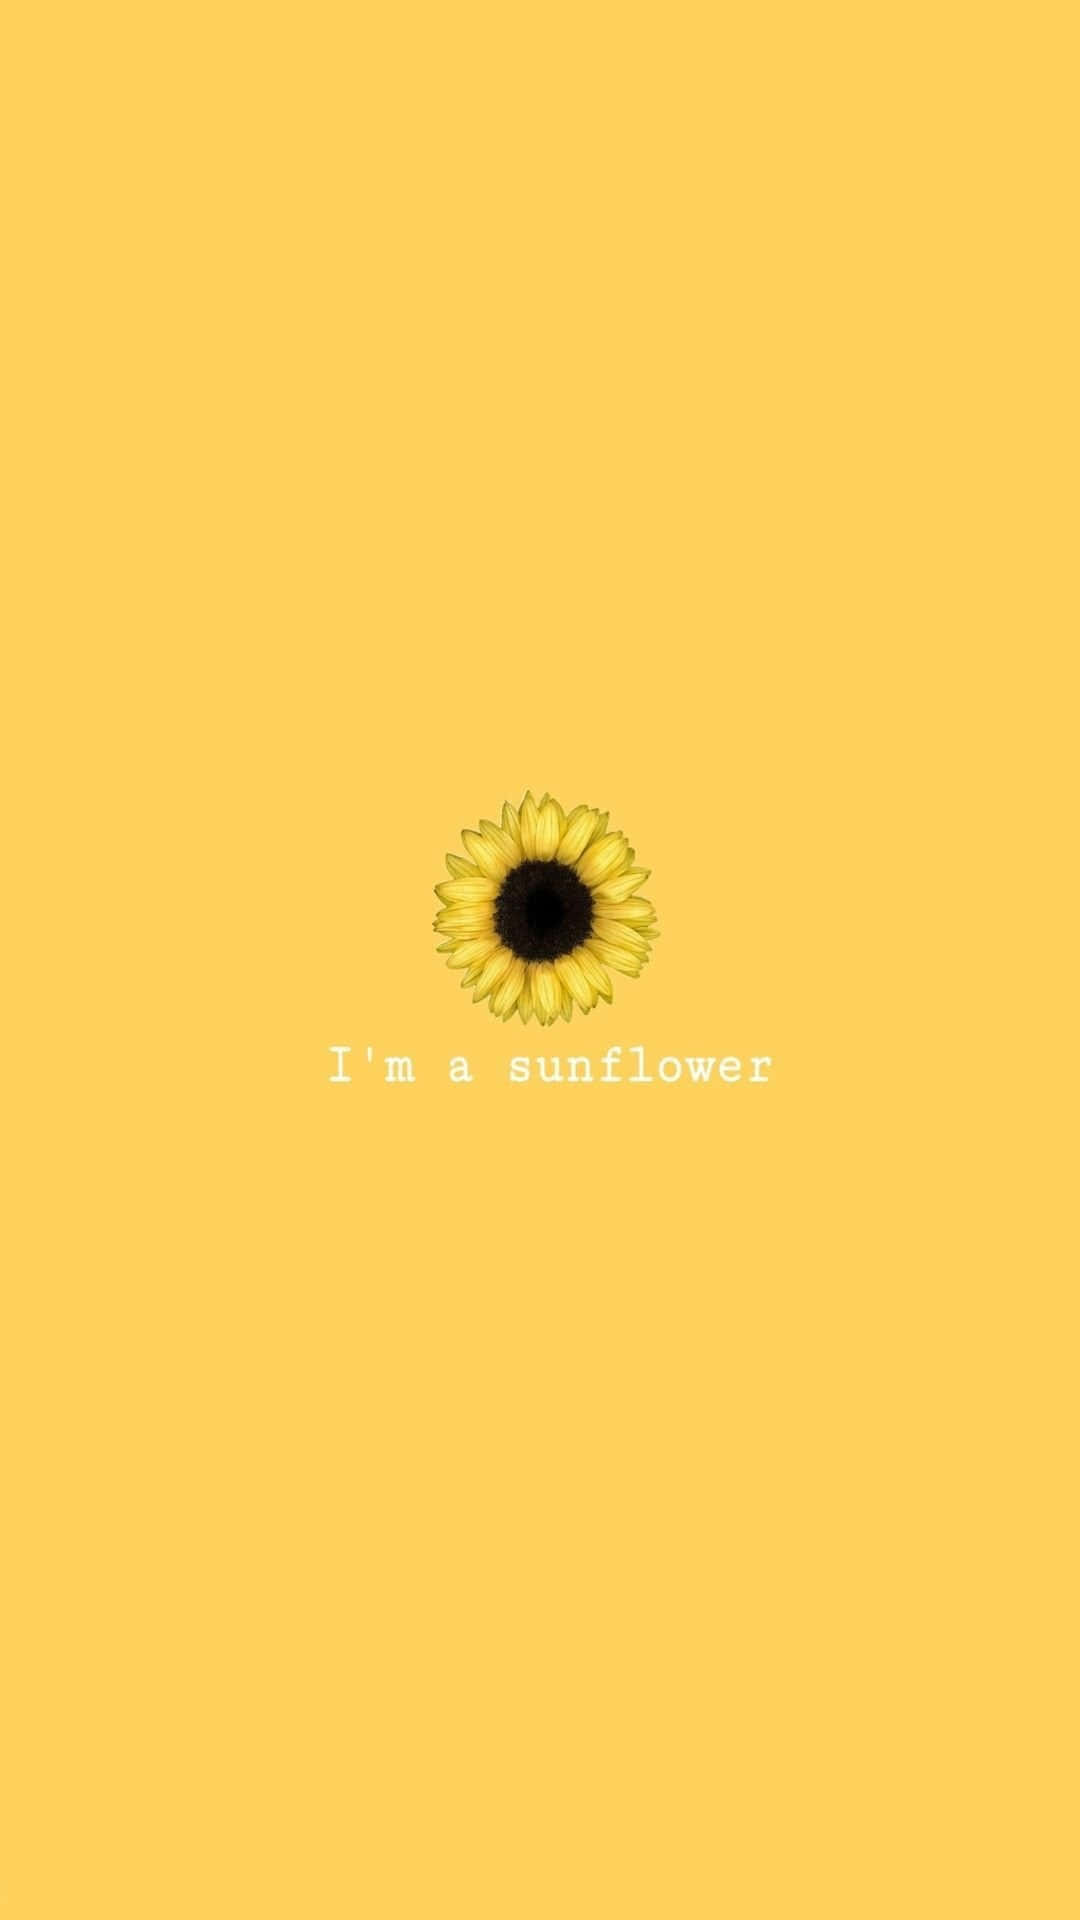 A bright and cheerful sunflower Wallpaper